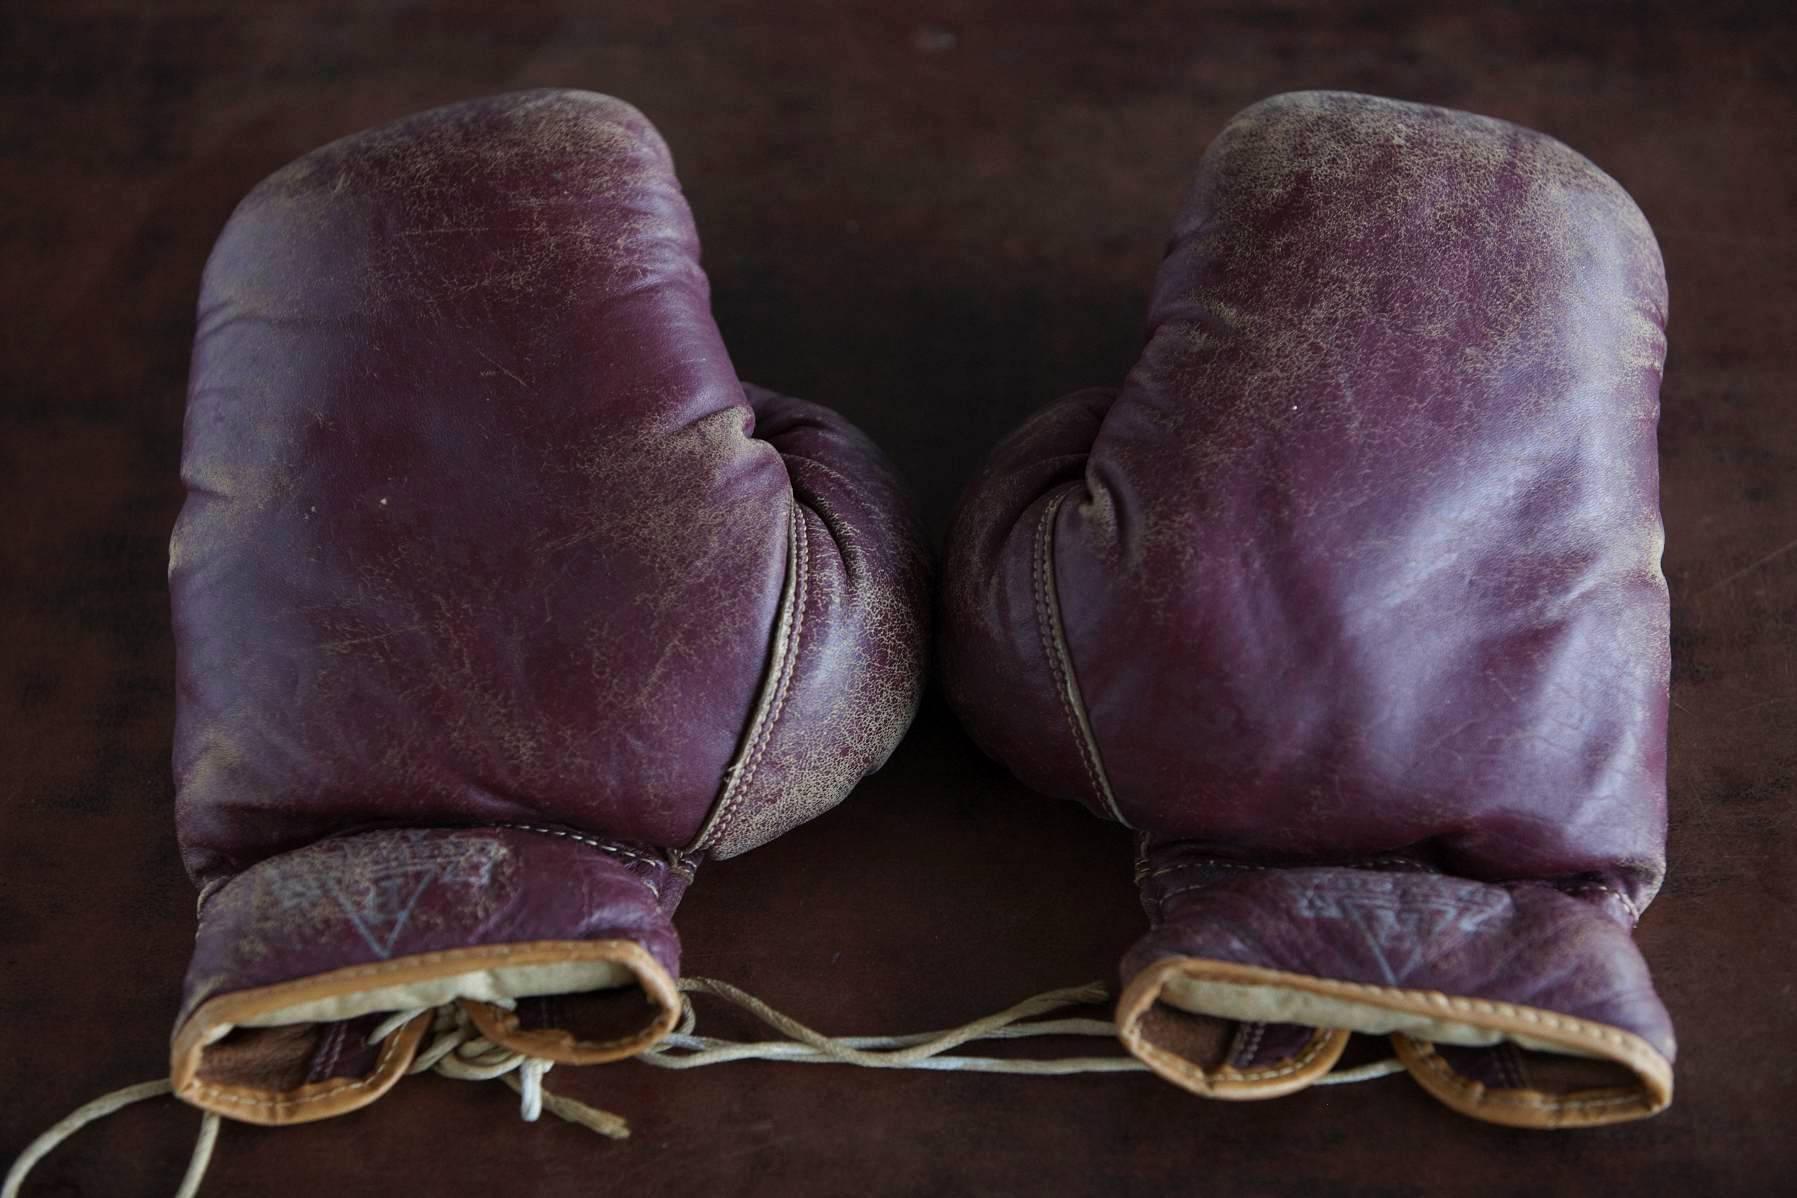 1930s boxing gloves